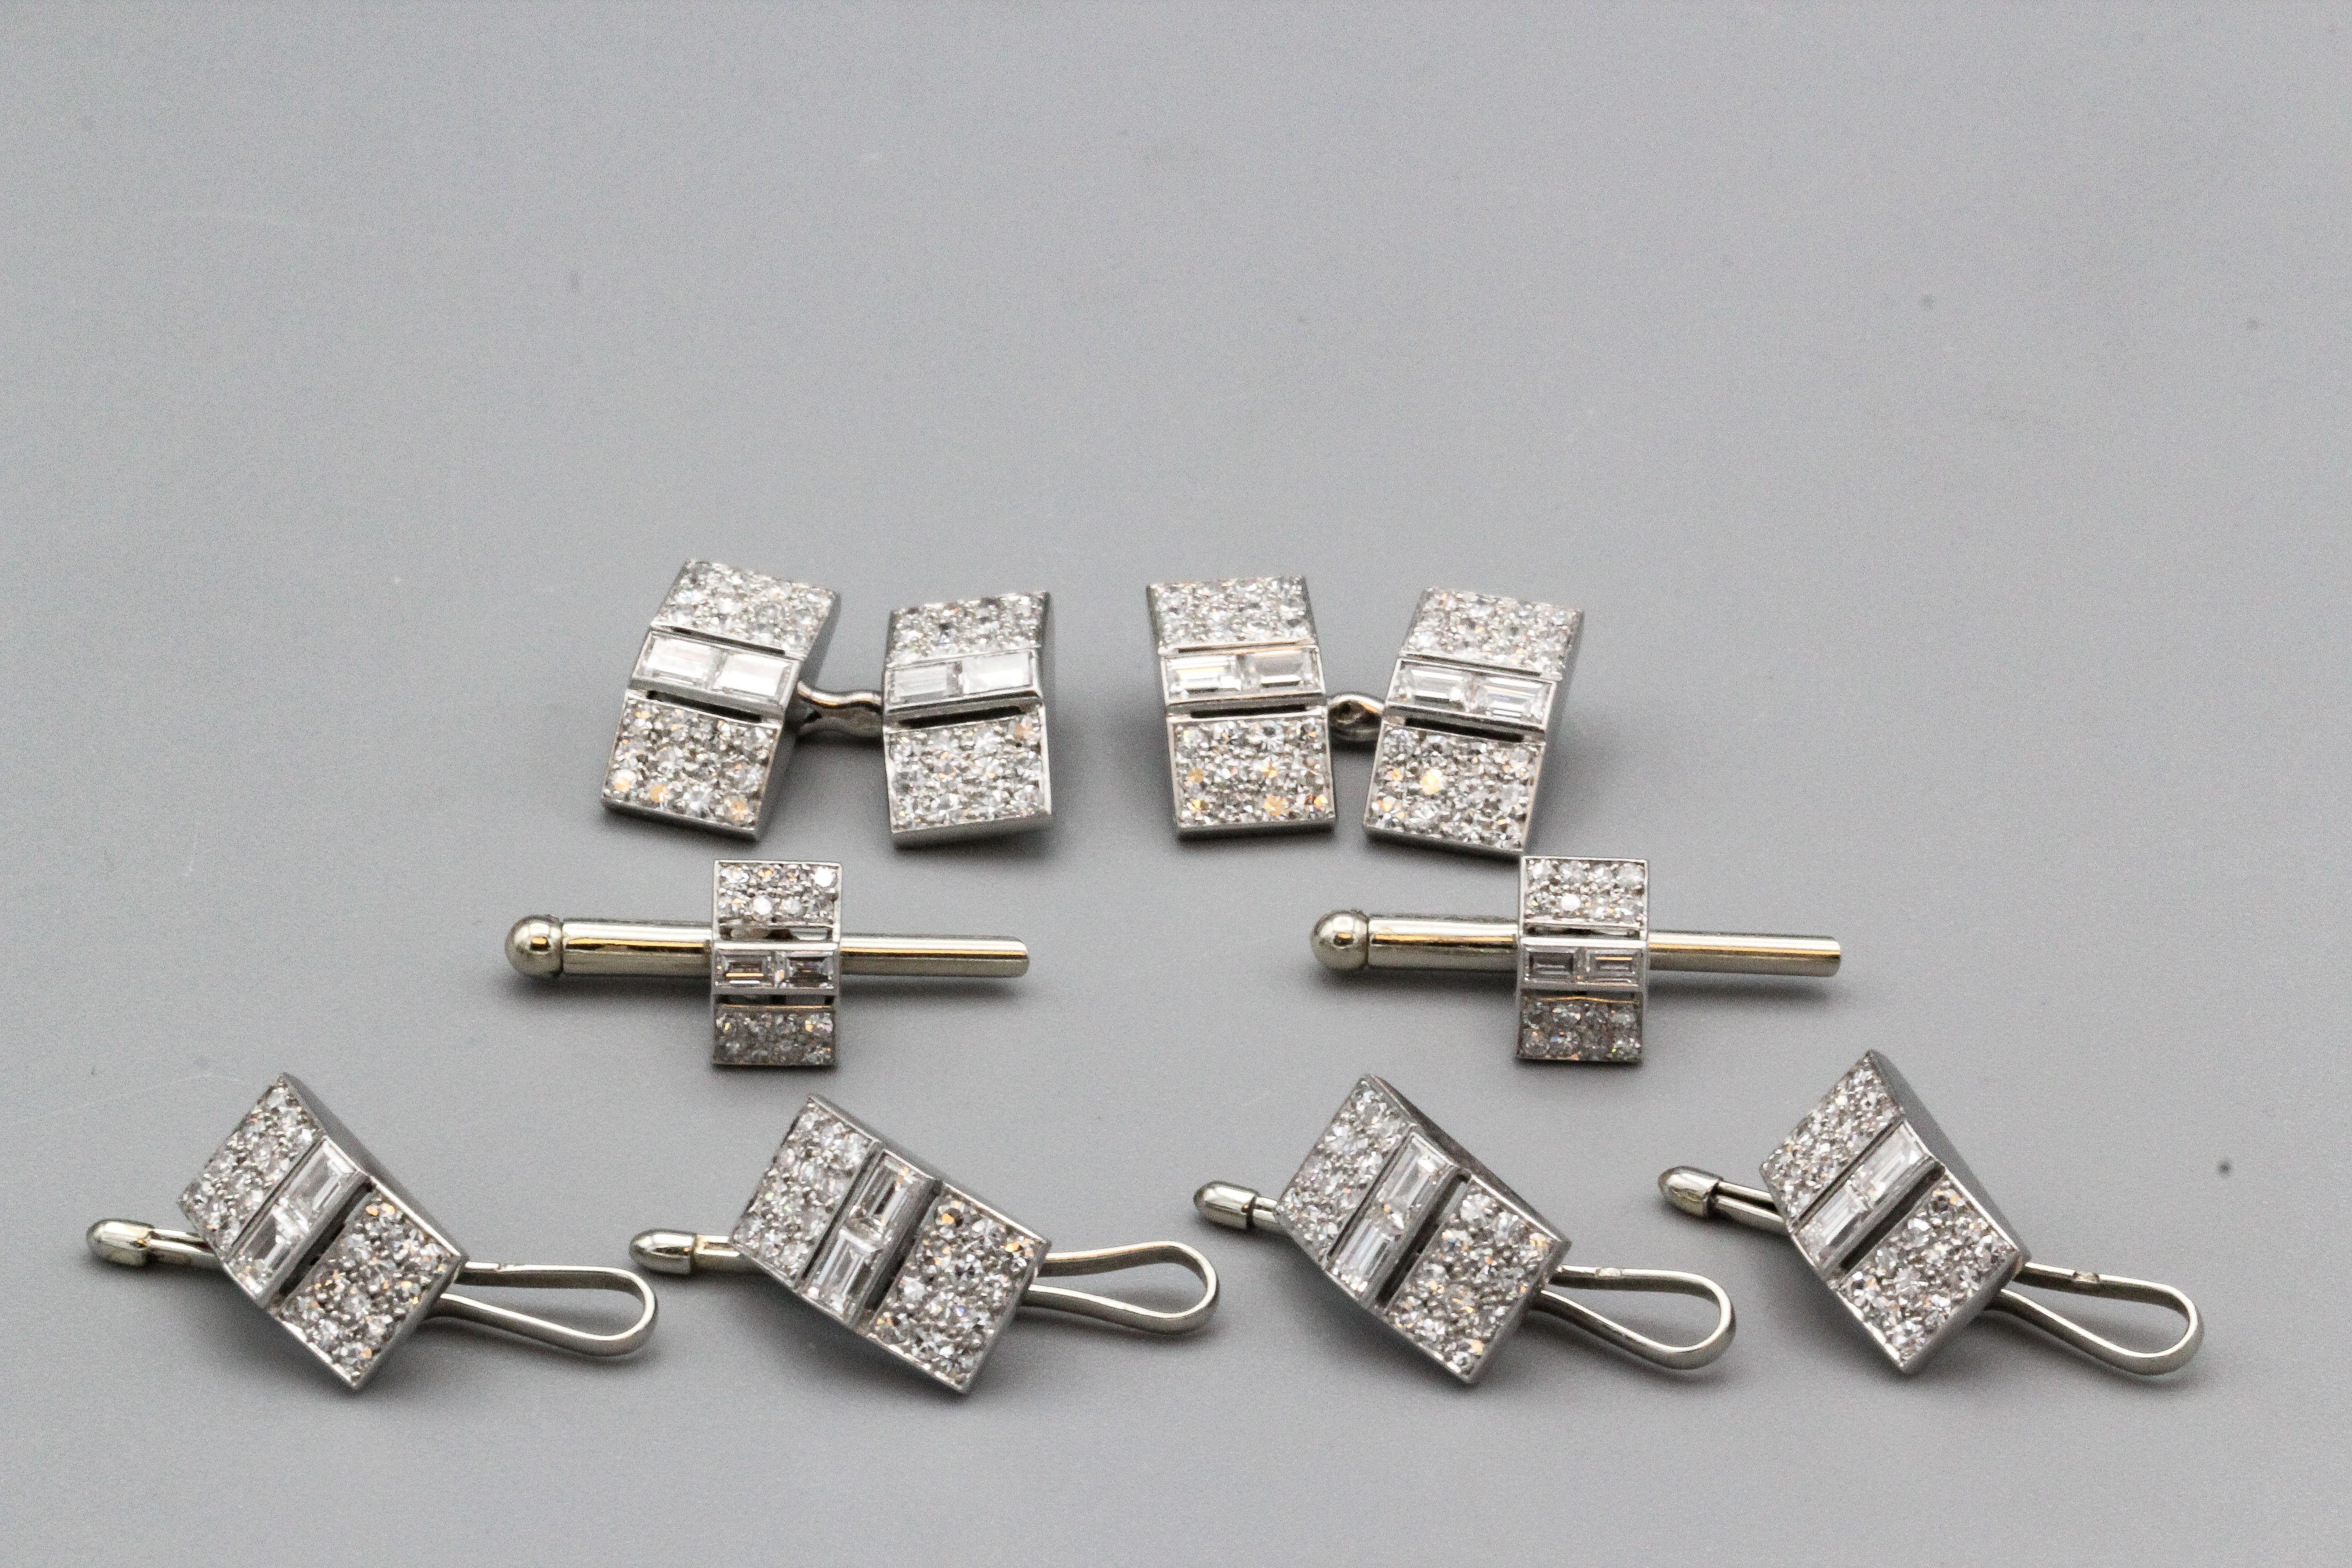 Fine set of Art Deco diamond and platinum cufflinks and studs tuxedo set, by Cartier circa 1920s.  Featuring a pair of cufflinks, four shirt studs, and a pair of collar buttons. 

This Cartier set is a remarkable example of the exquisite